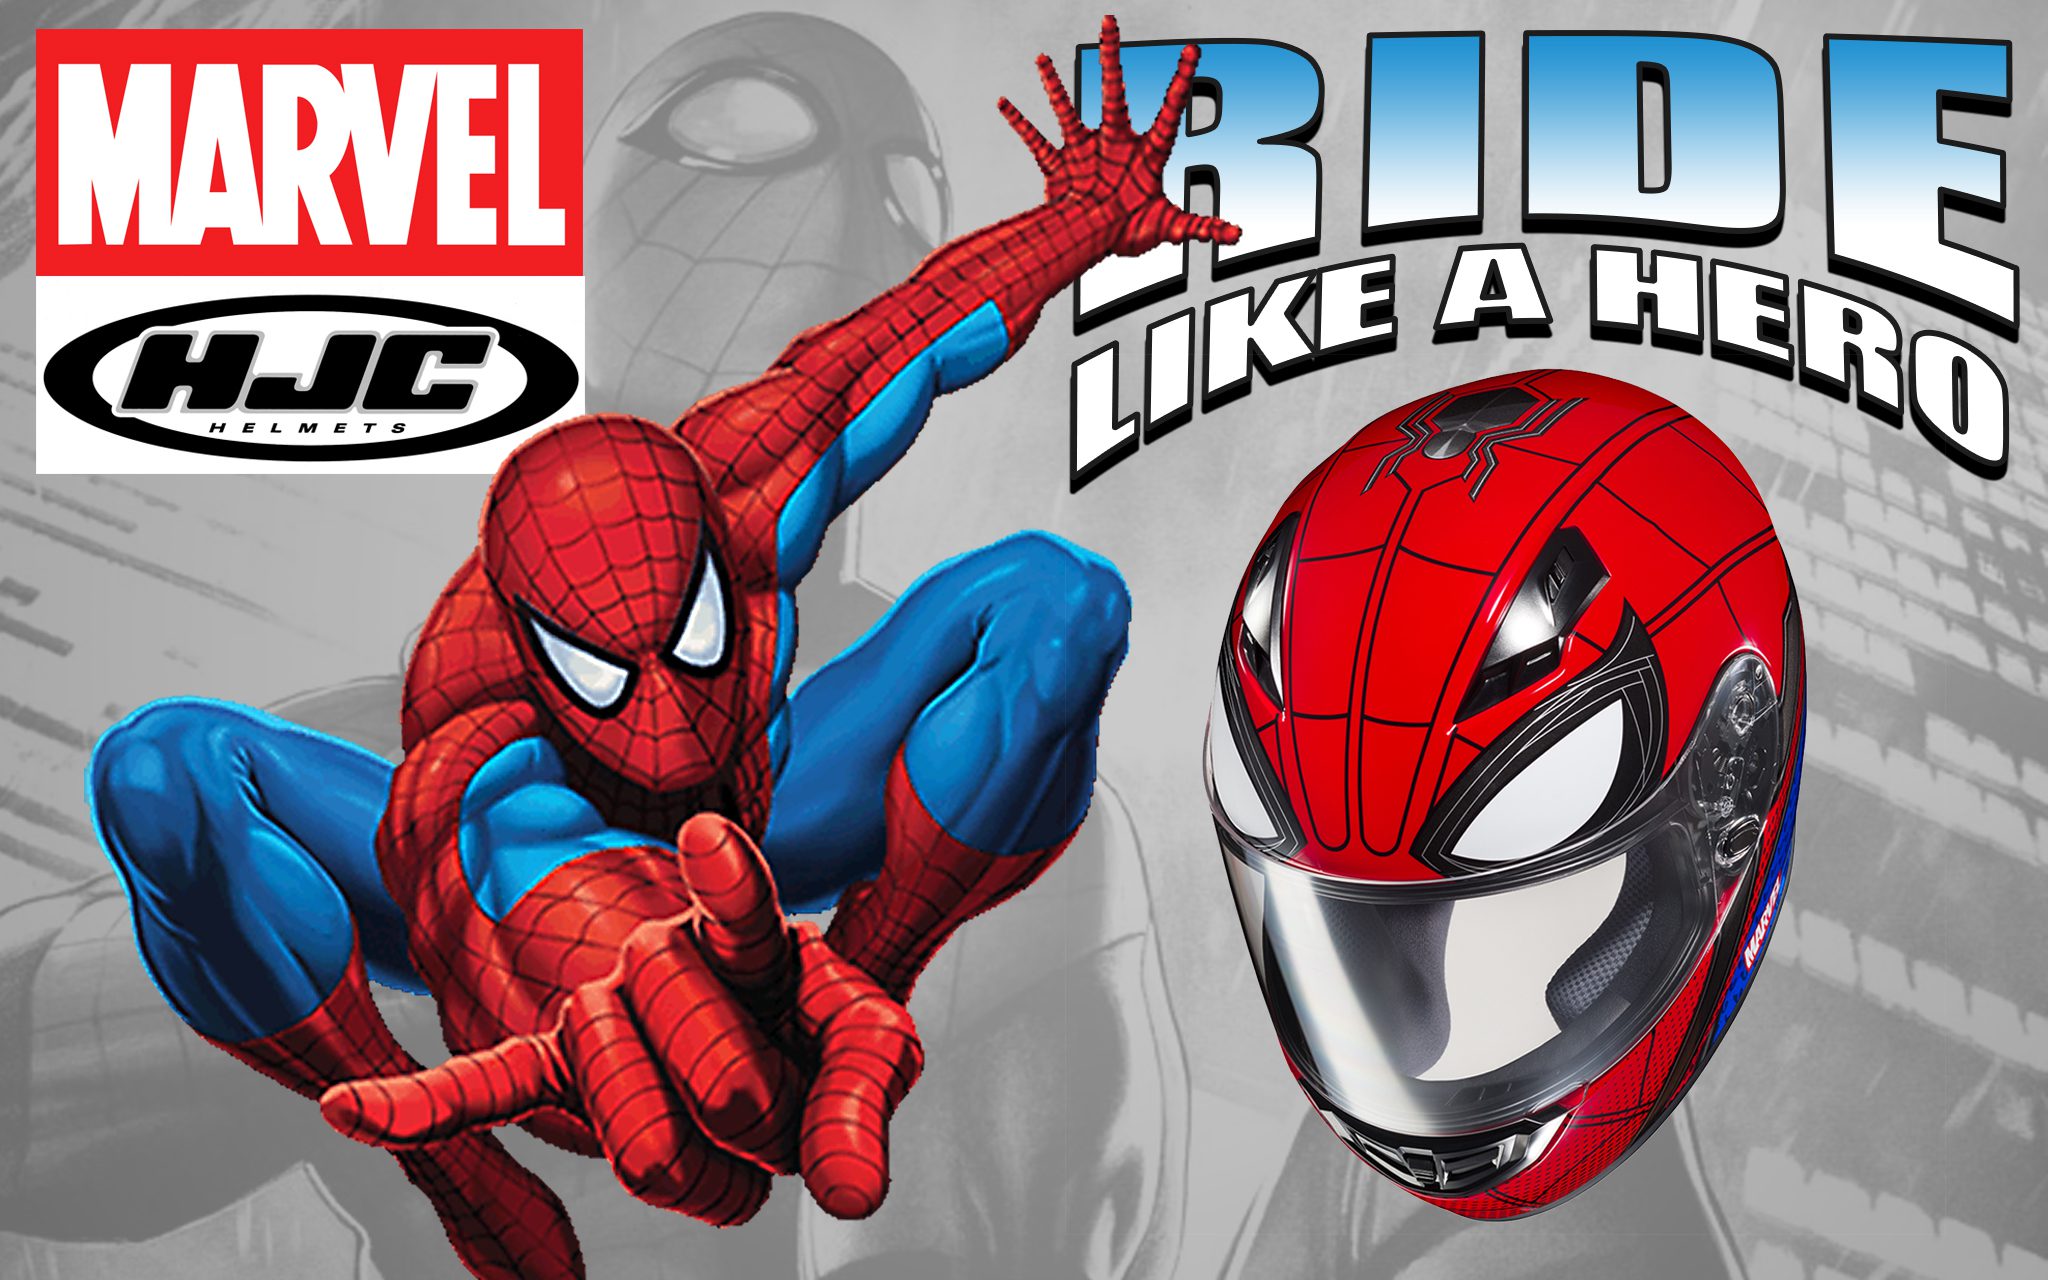 Official graphic from HJC and Marvel featuring comic Spider-Man and the Spider-Man Homecoming Helmet with the words "Ride like a Hero"